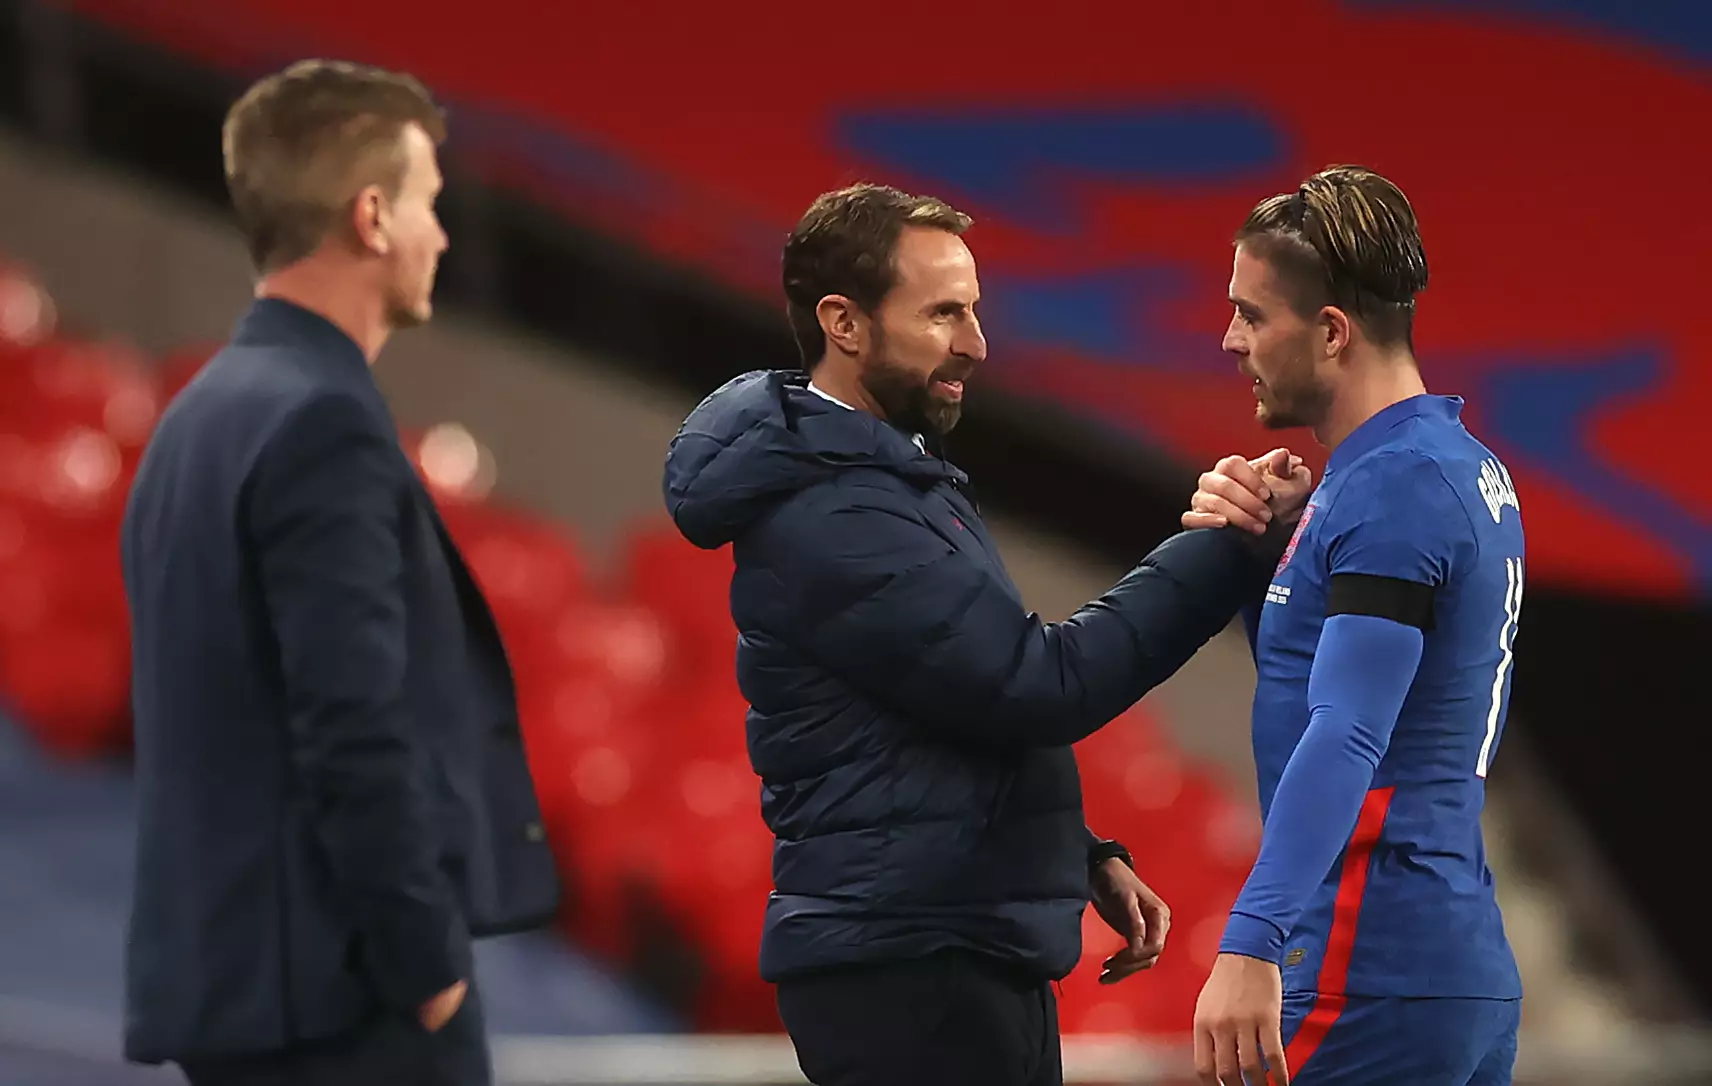 Jack Grealish has put in some impressive displays in an England shirt under Gareth Southgate